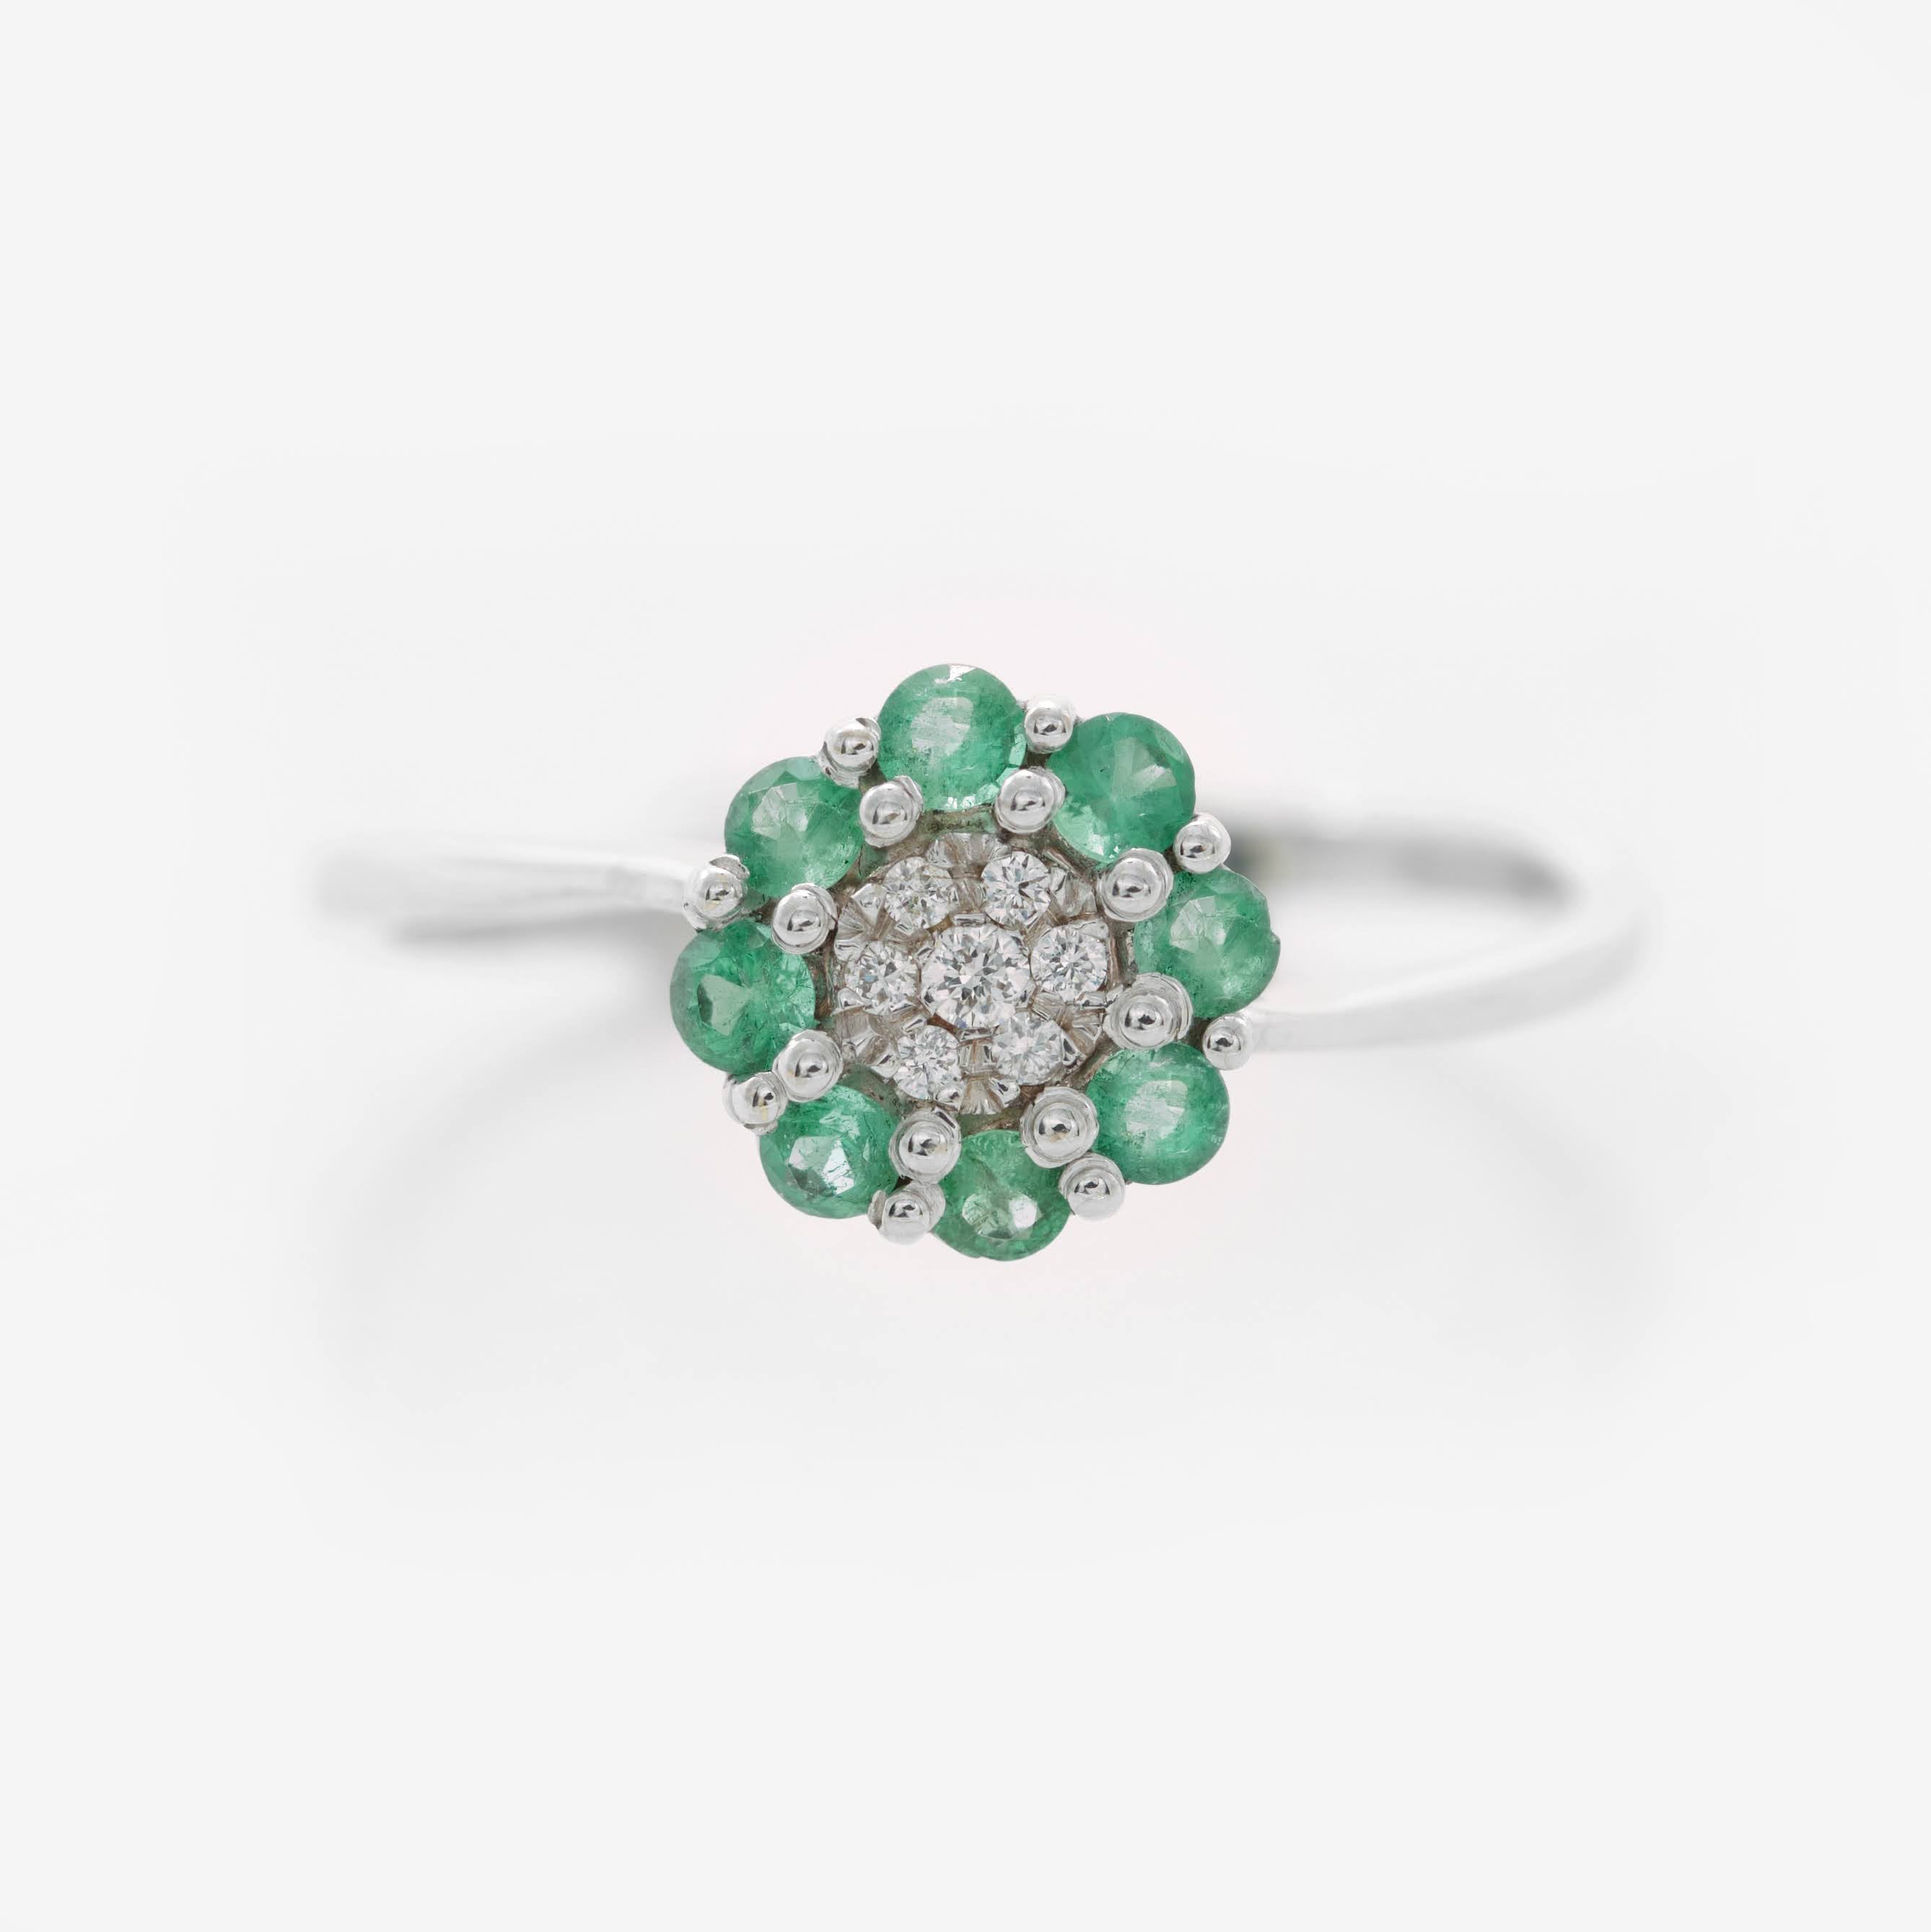 Flower ring with emeralds and diamonds